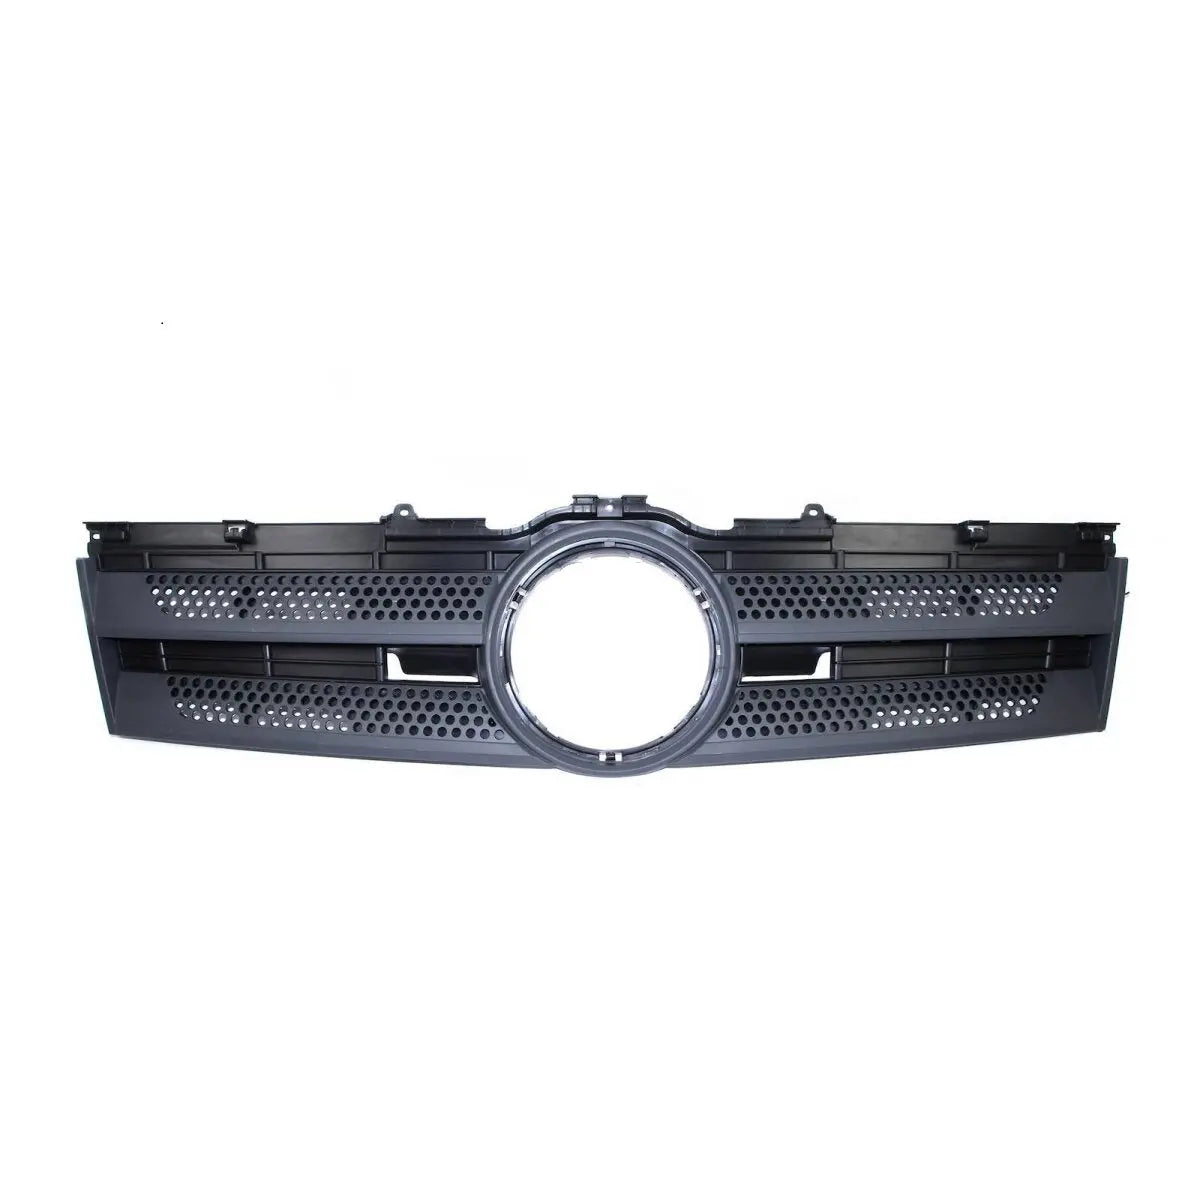 CHINA Factory Wholesale 9607500318 A9607500318 Grille Front Panel For MERCEDES BENZ FANCHANTS China Auto Parts Wholesales